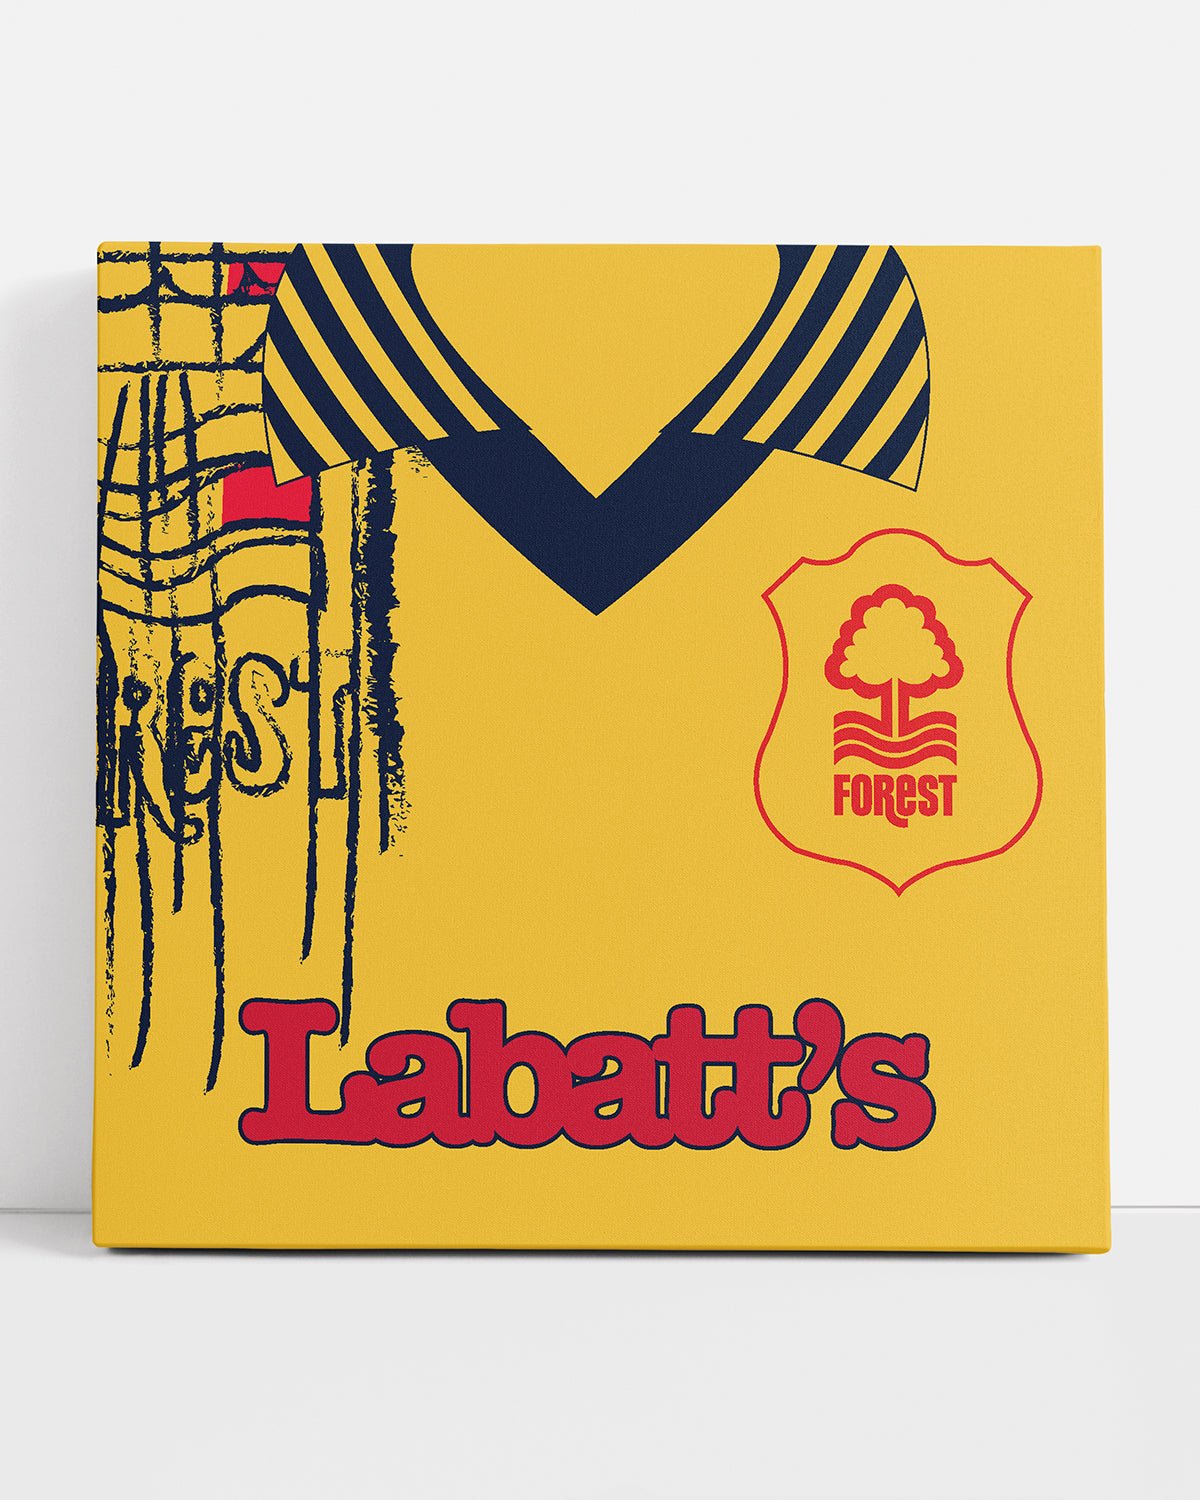 NFFC 1995 Away Retro Canvas - Nottingham Forest FC